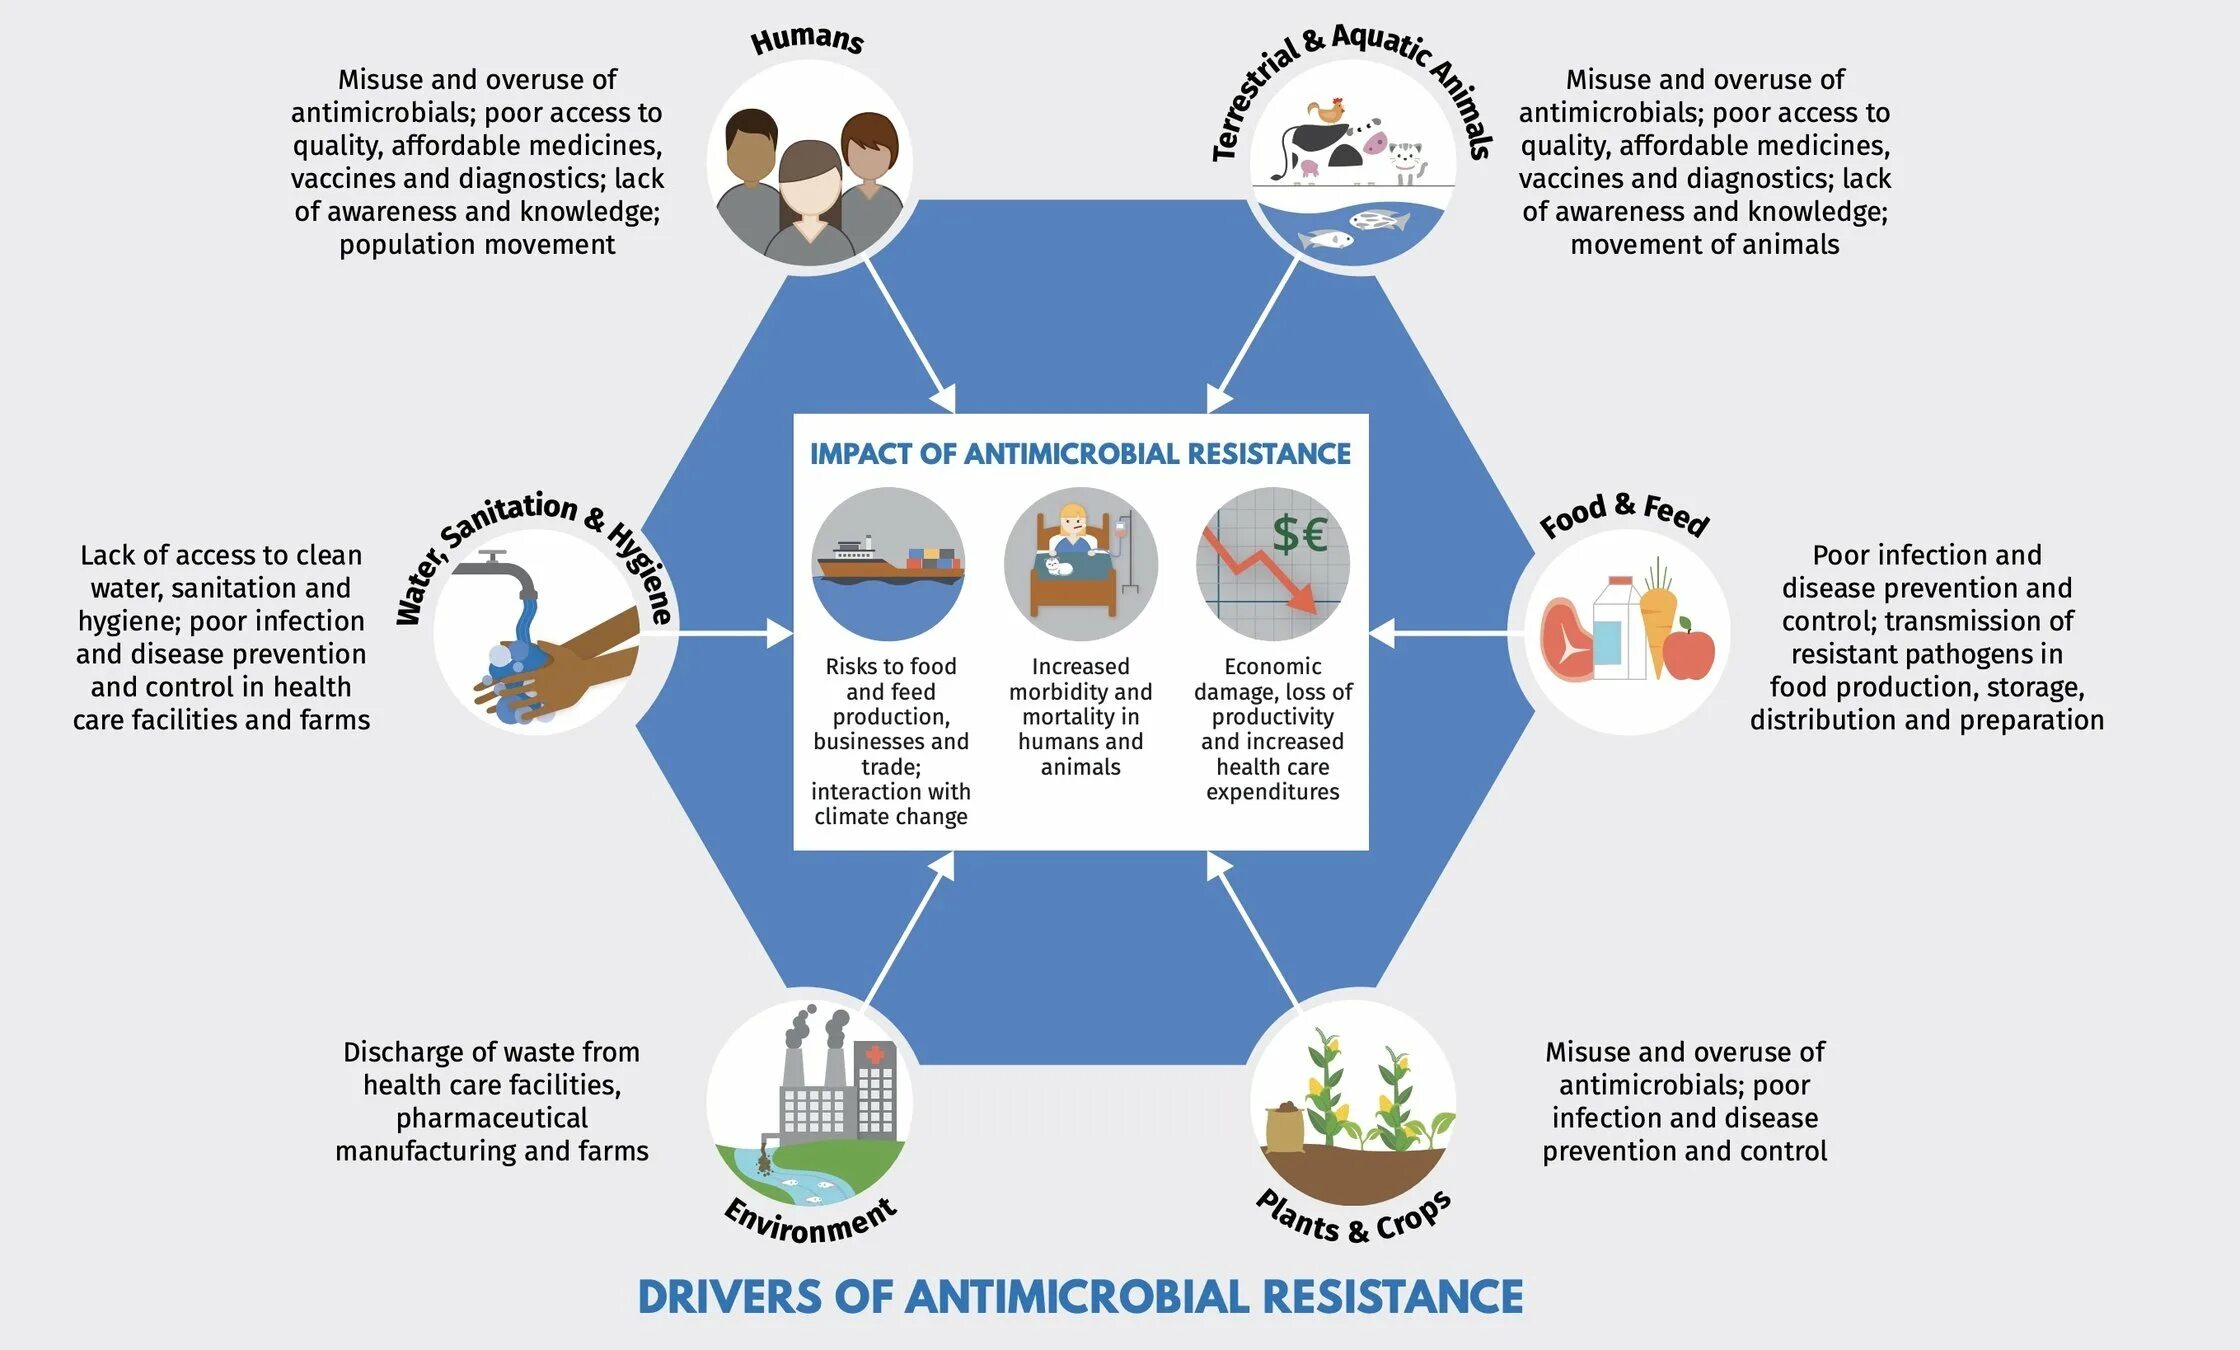 Antimicrobial Resistance. One Health. Drug-Resistant infections. Healthcare waste Management & infection Prevention and Control.